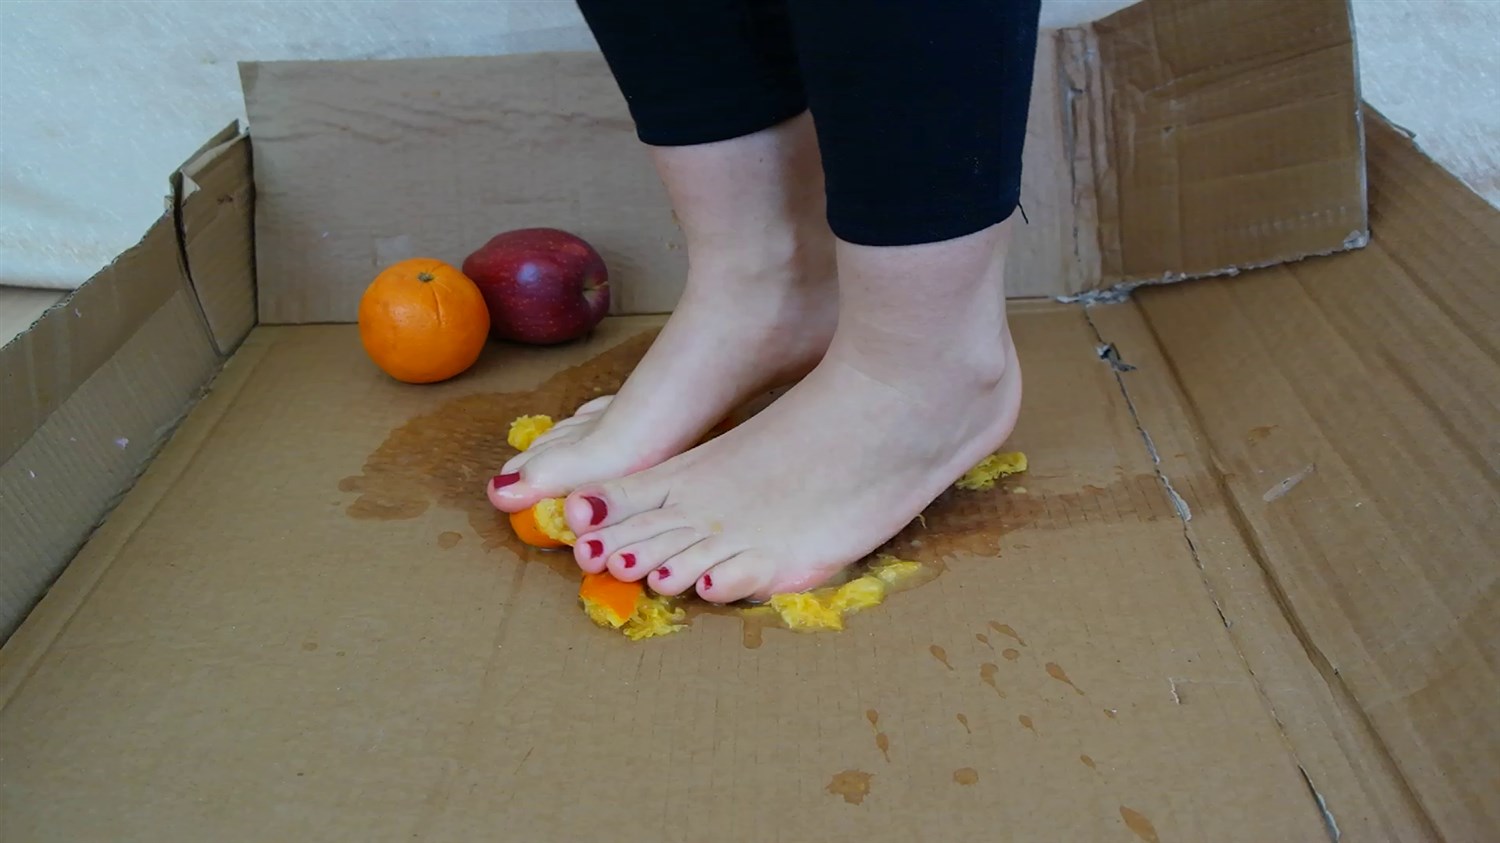 Caroline Barefoot Fruit Crush Want Feet Foot Fetish Videos Sexy Feet And Soles 